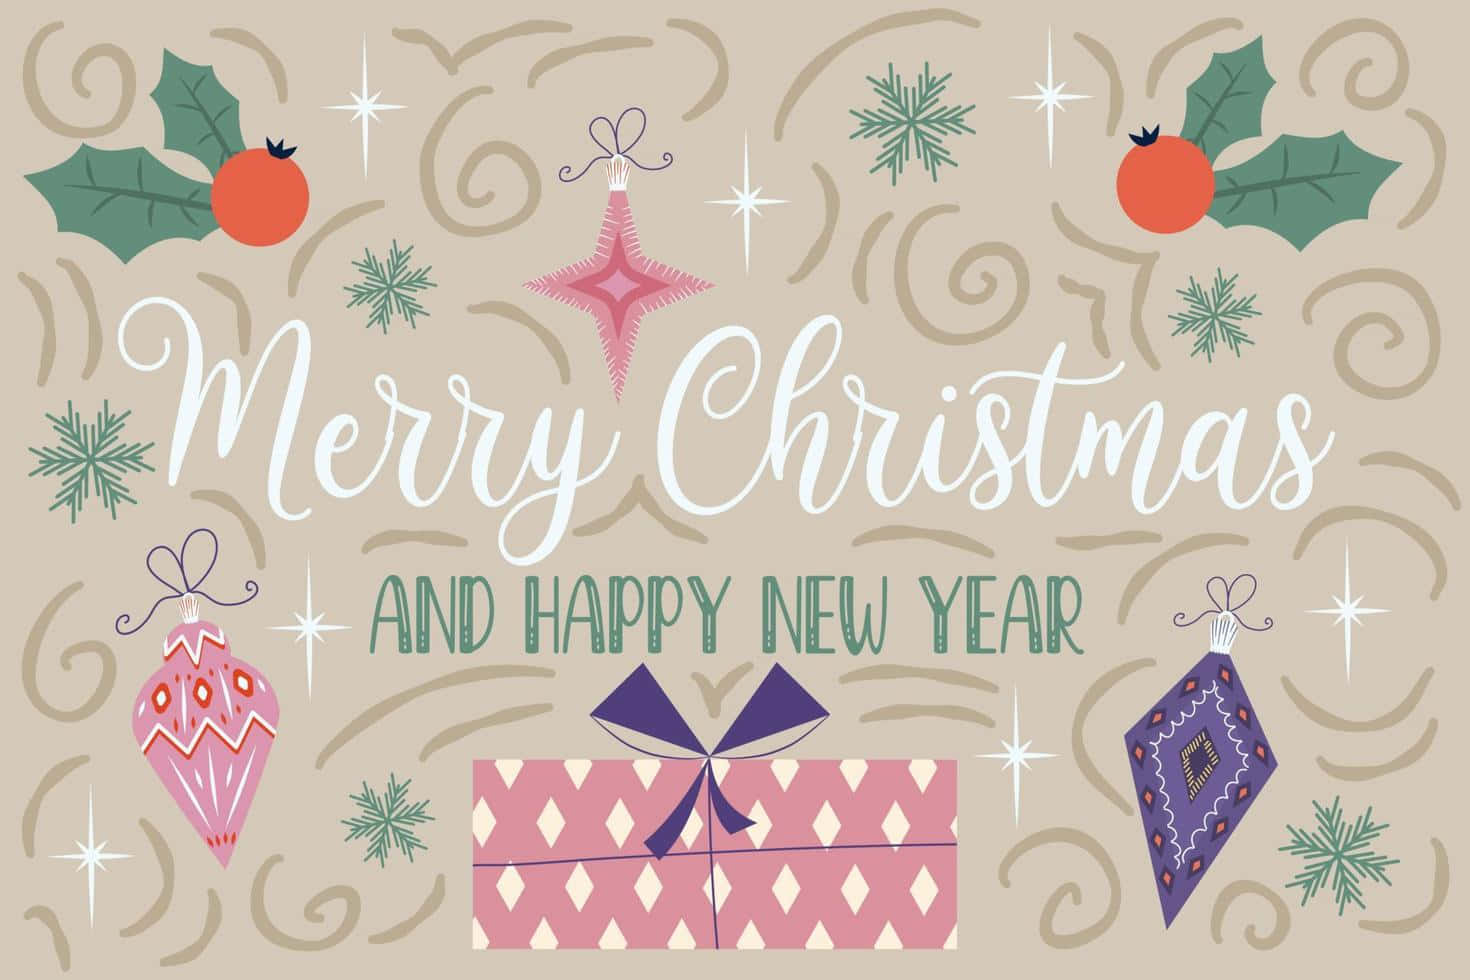 Merry Christmas Happy New Year Greeting Wallpaper